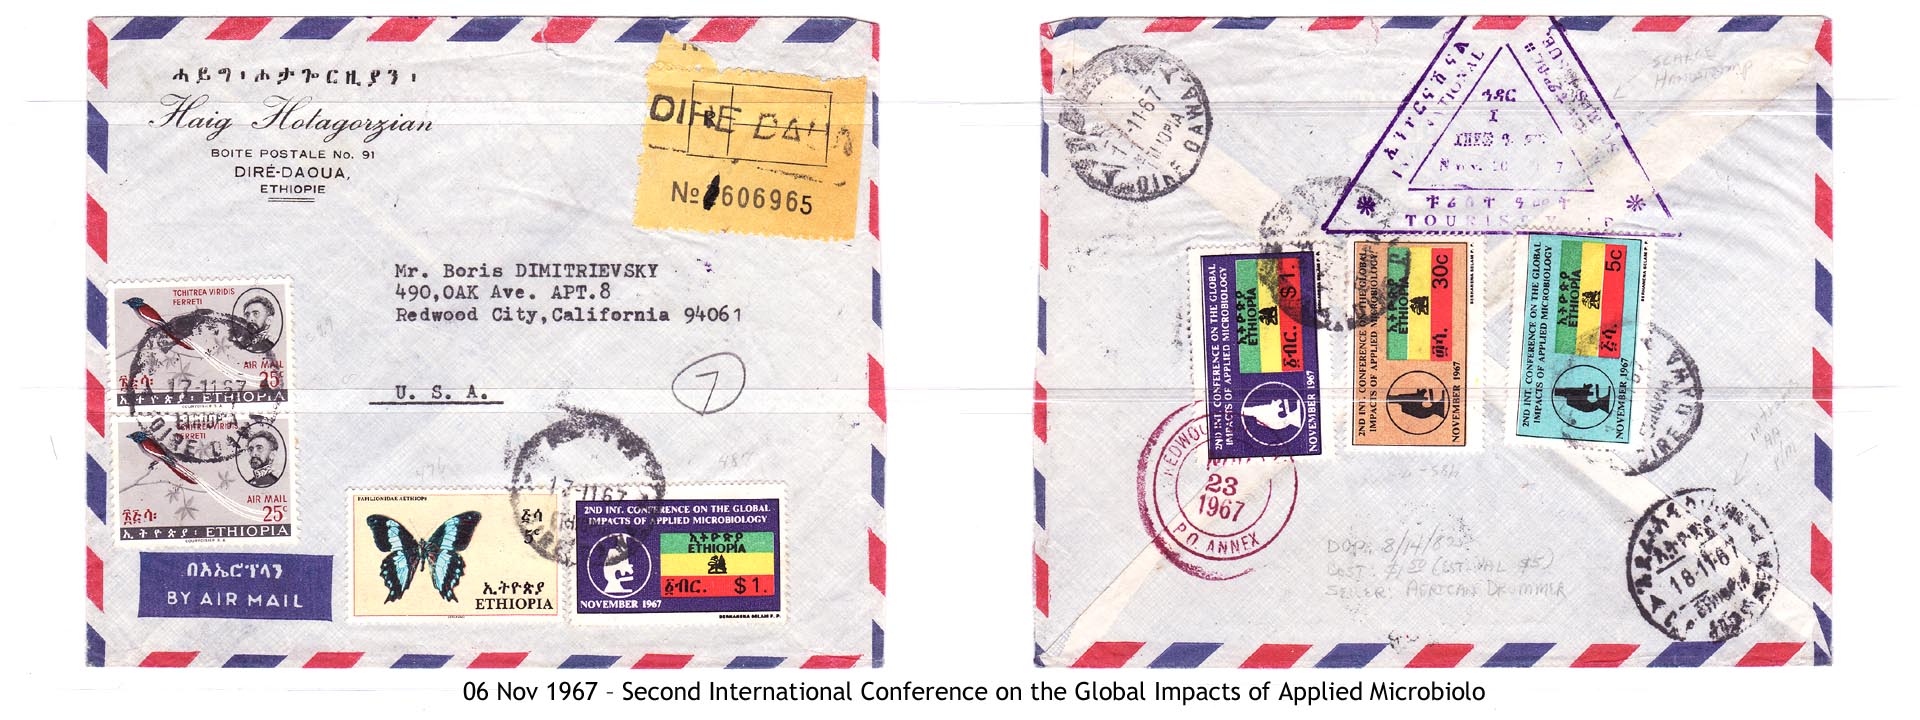 19671106 – Second International Conference on the Global Impacts of Applied Microbiology